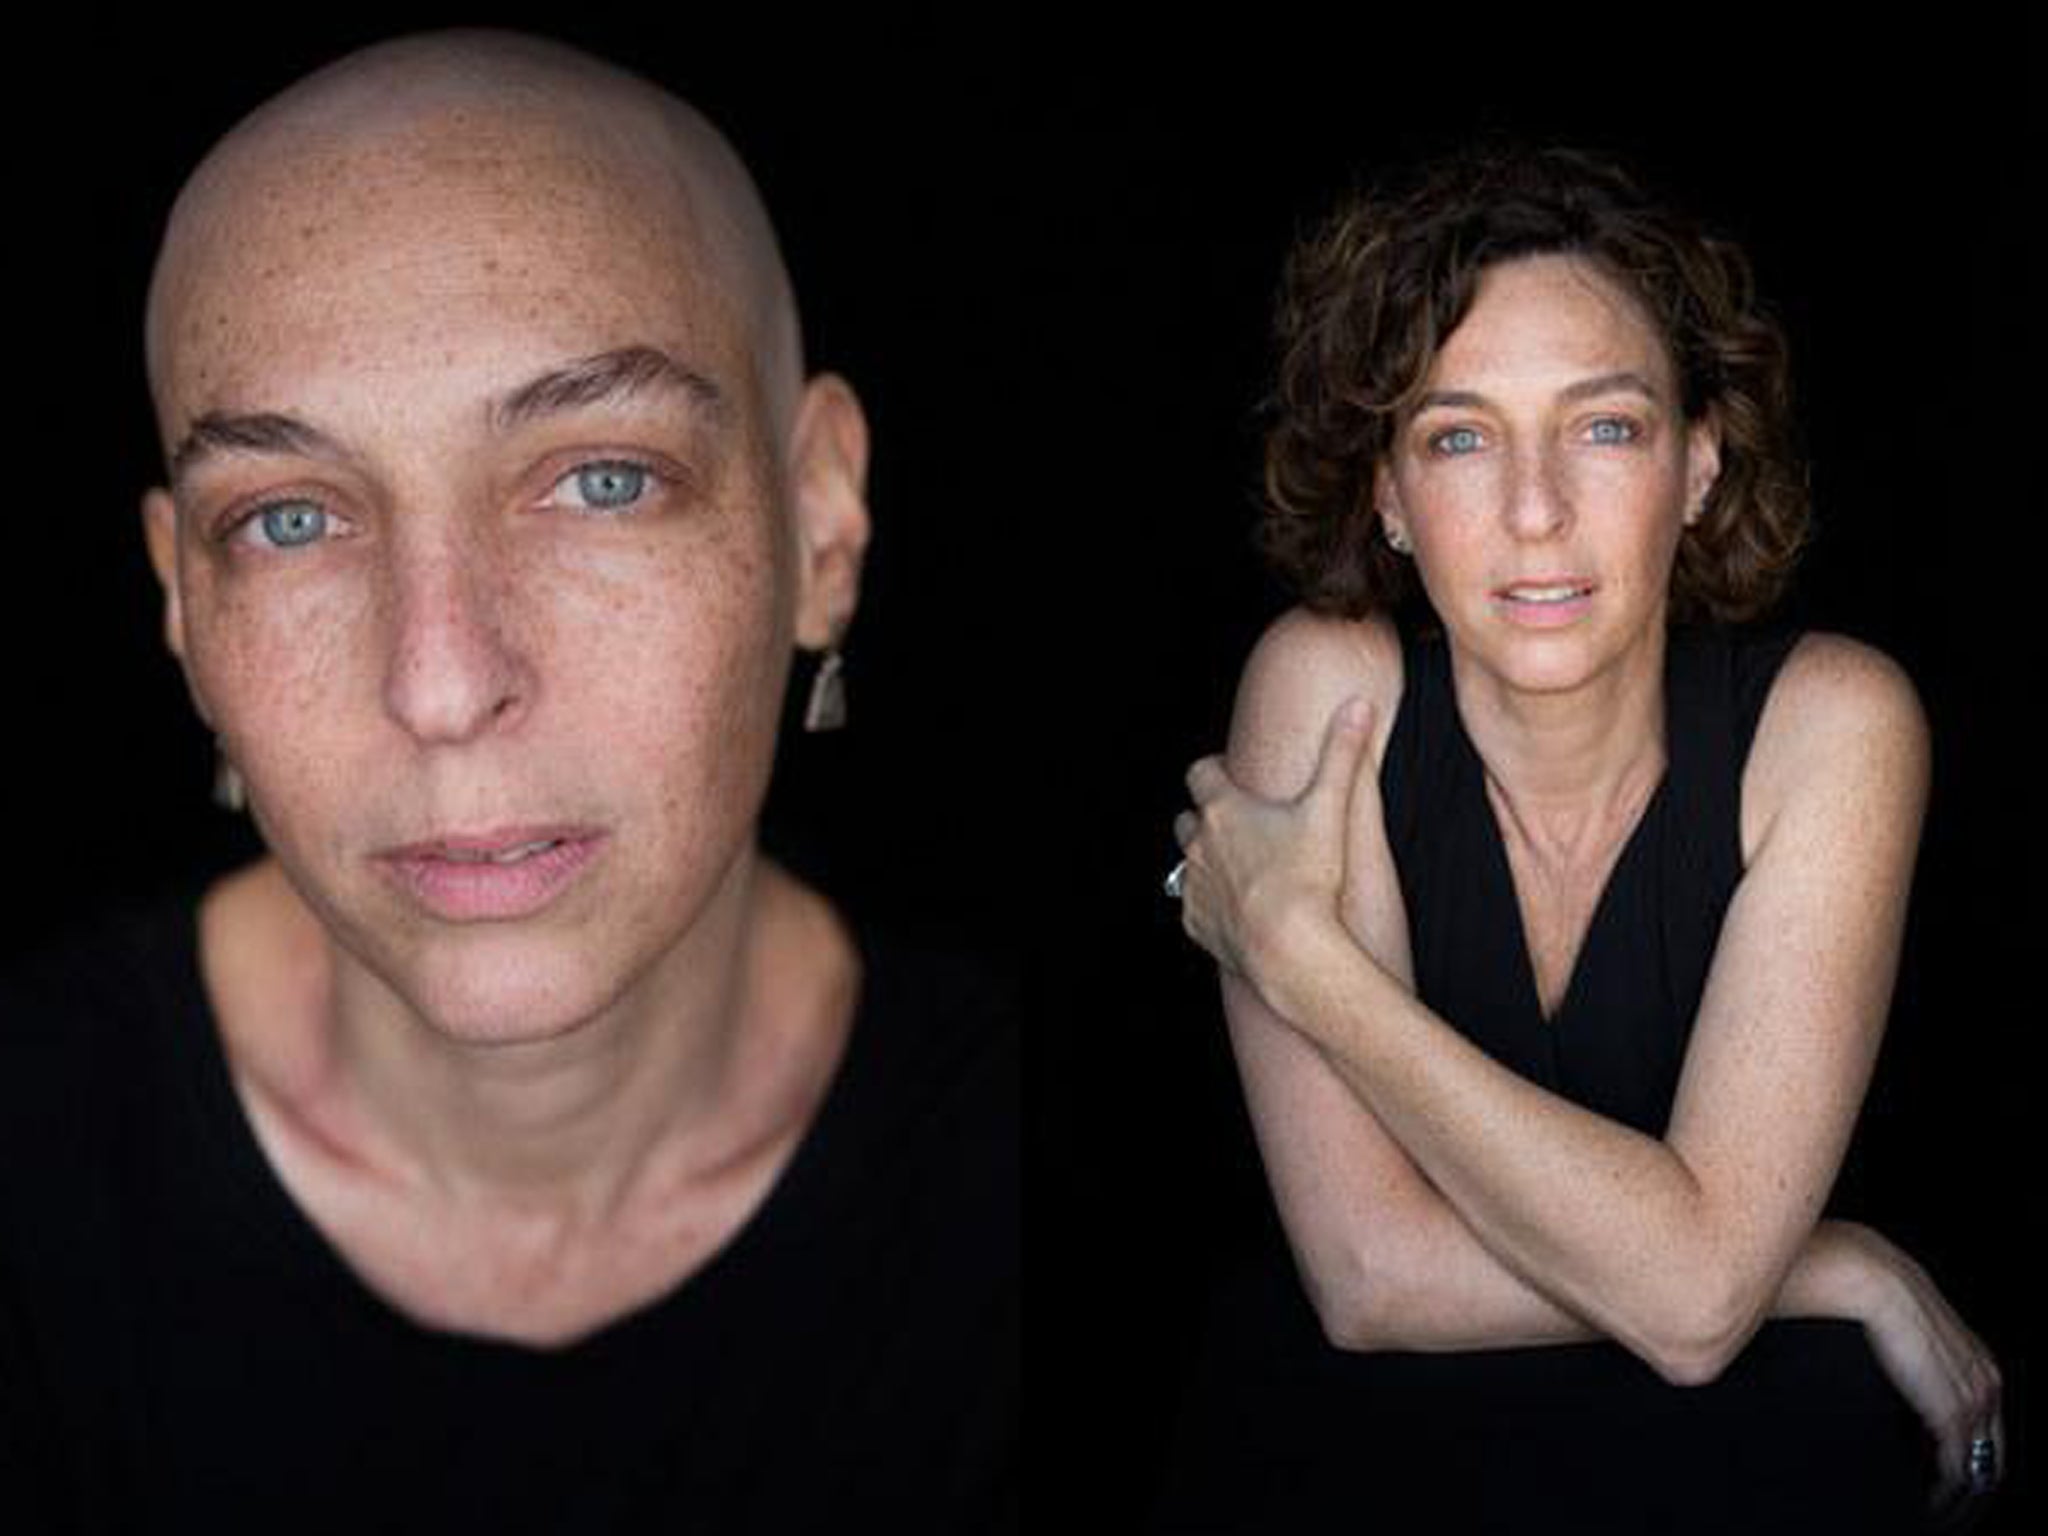 The Facing Chemo project aimed to give confidence to women battling cancer